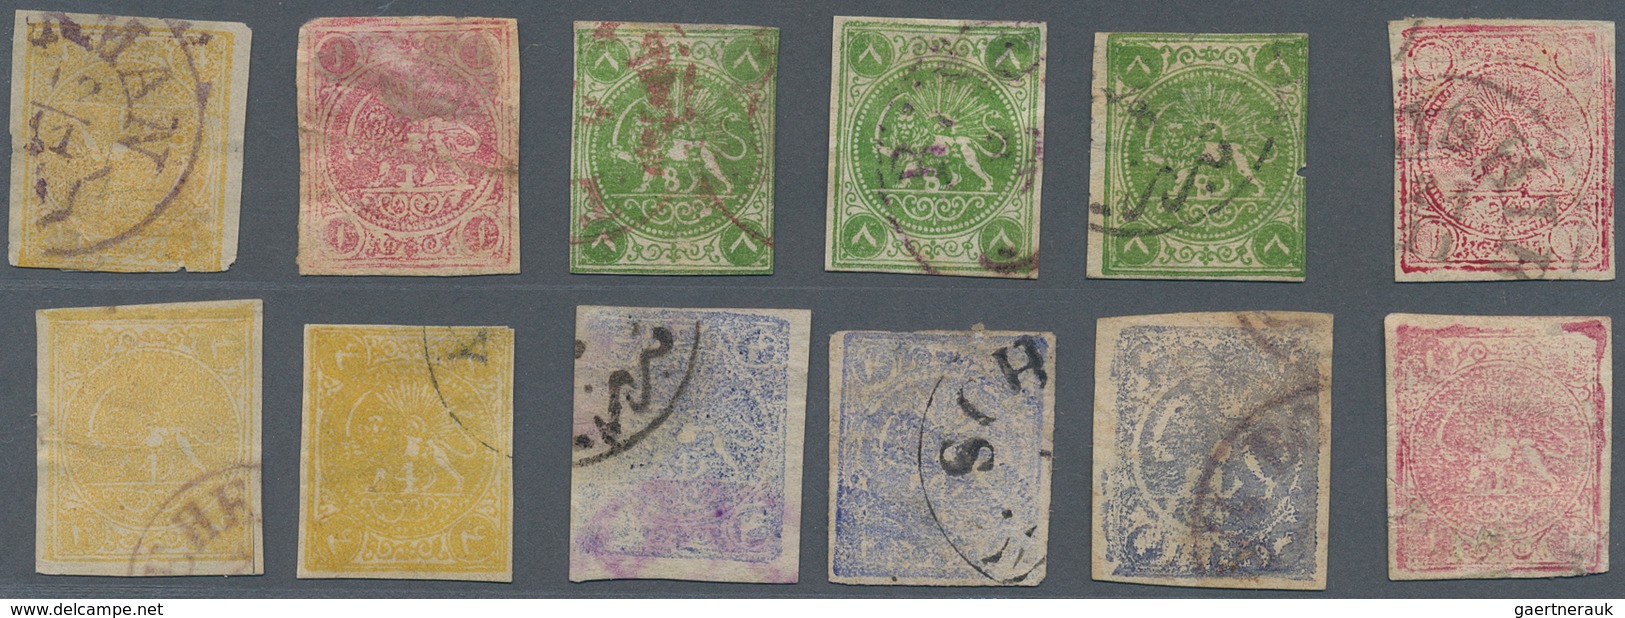 Iran: 1868-78, Lions Issue 21 Stamps Clear Cancelled, Some Faults And Thins, Still Fine For Study - Irán